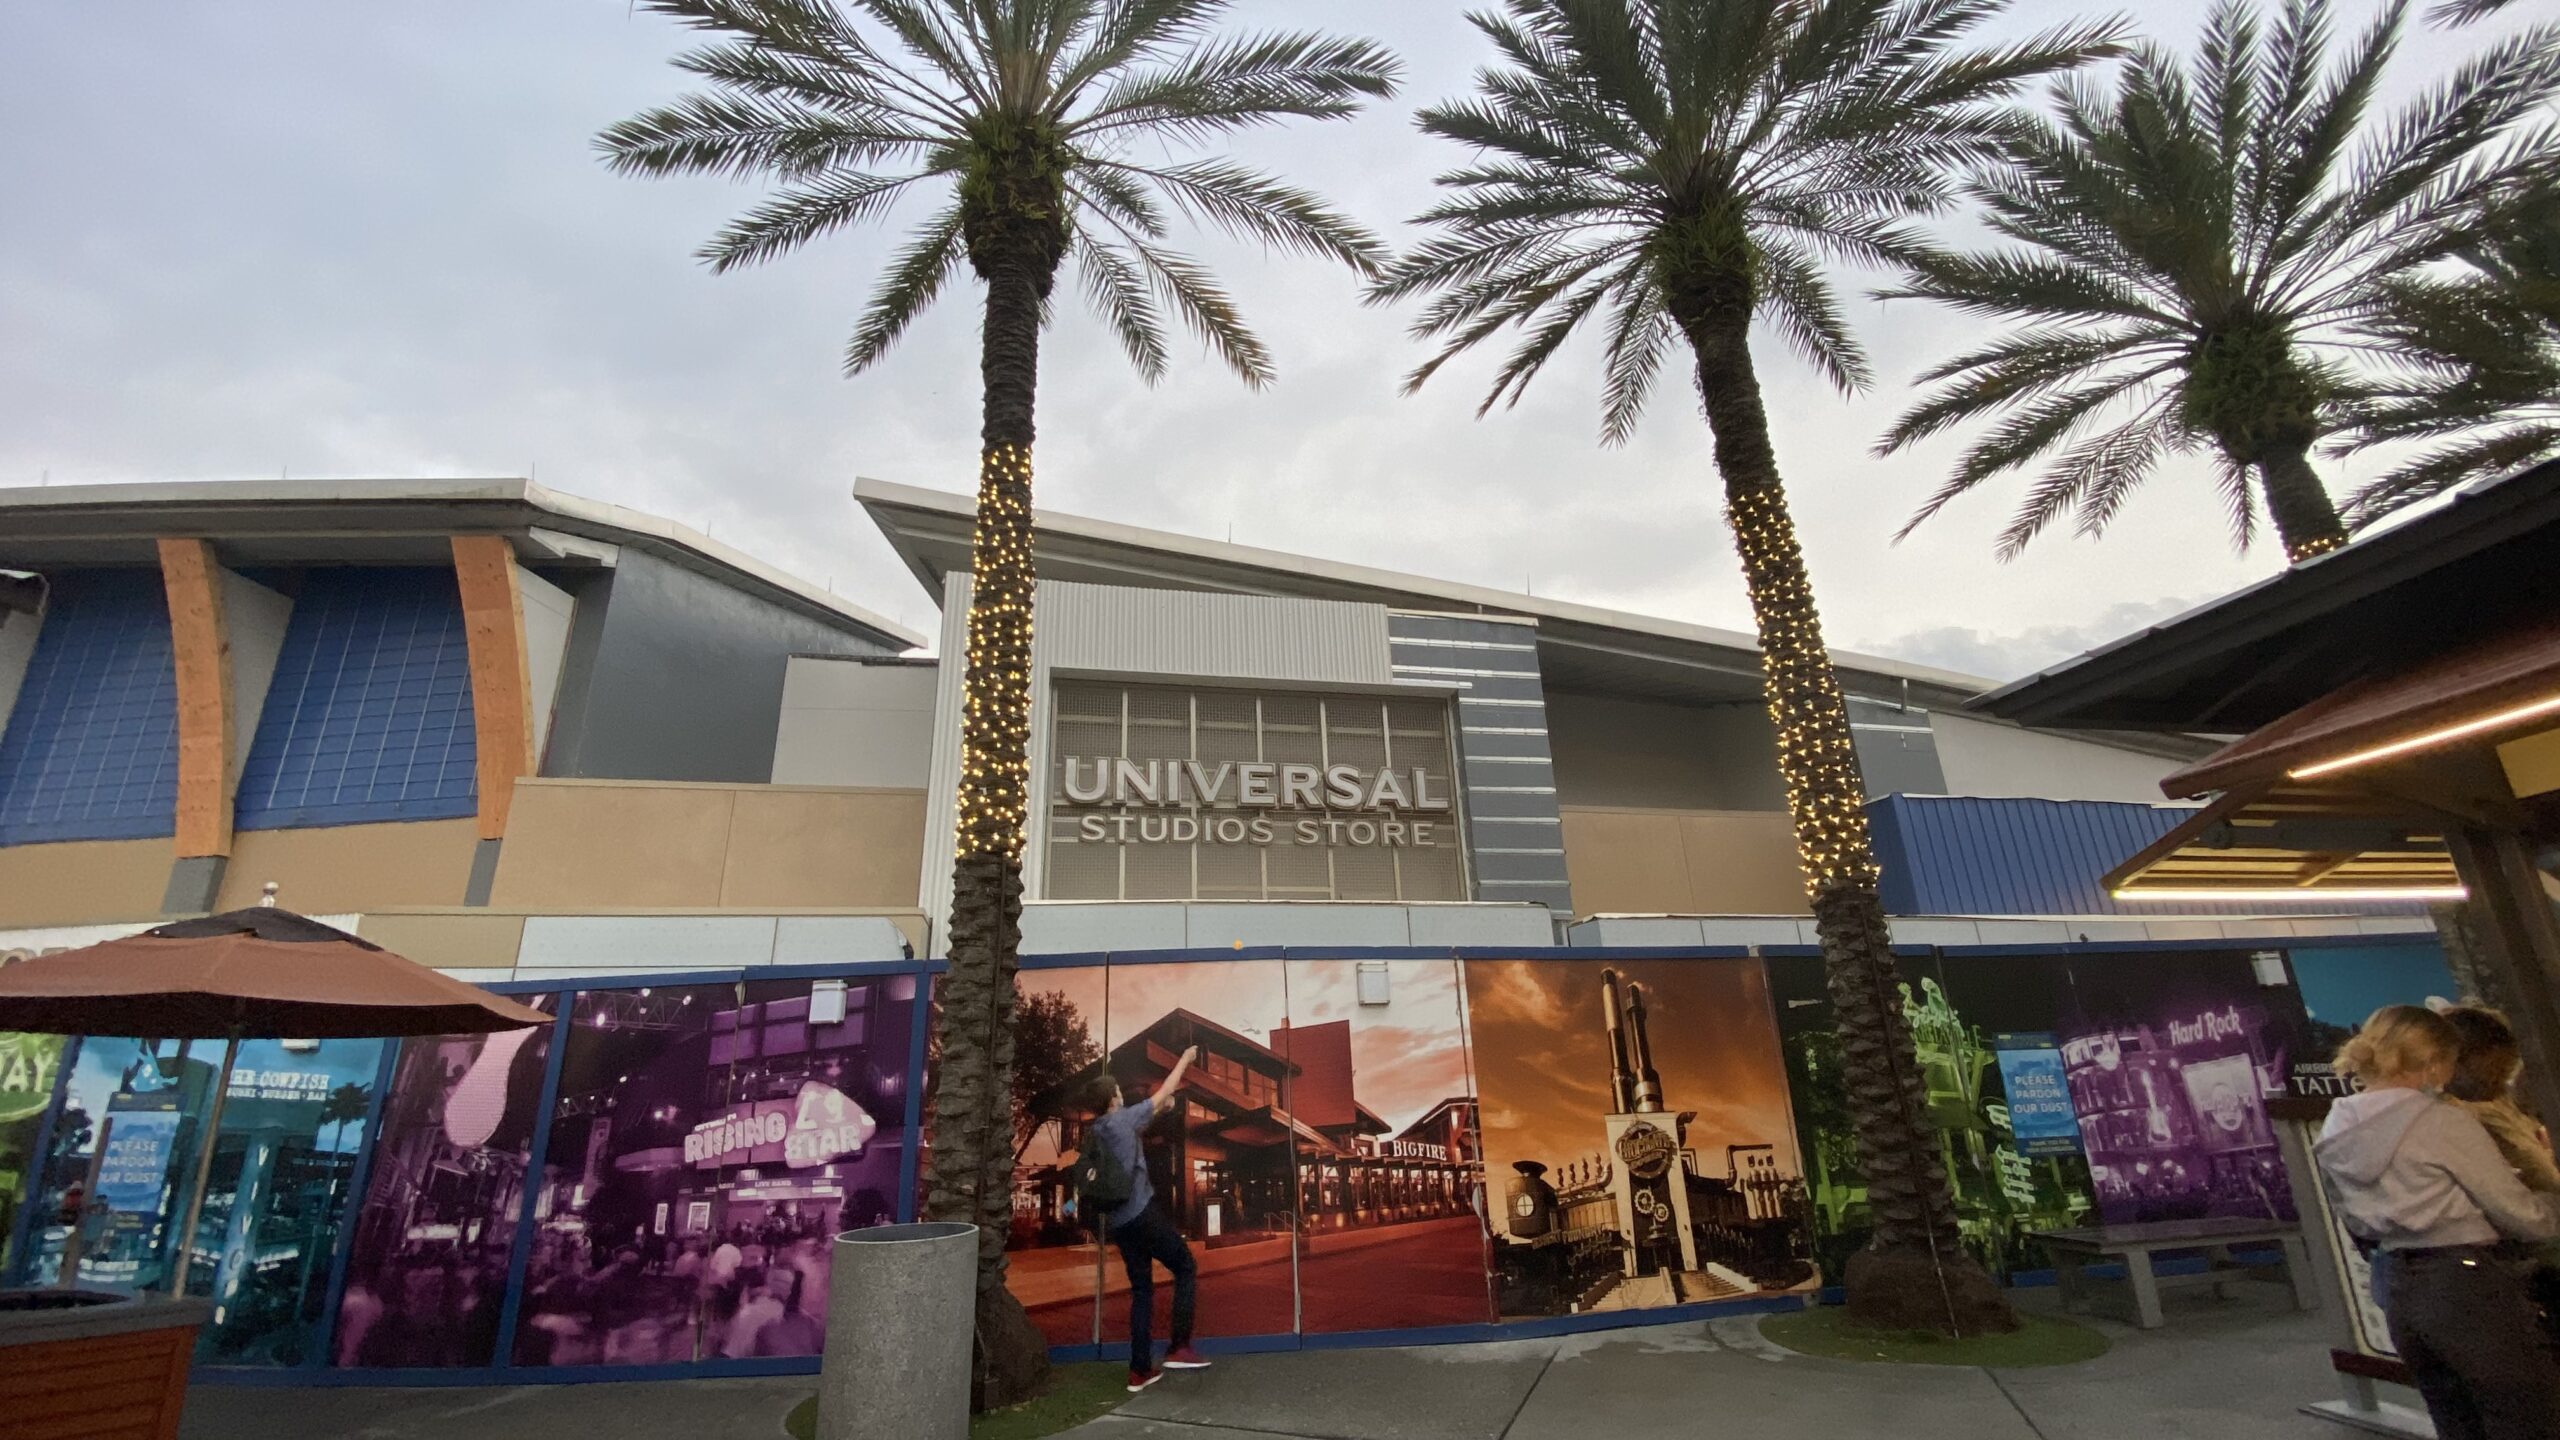 Universal Store in Citywalk Has a New Sign